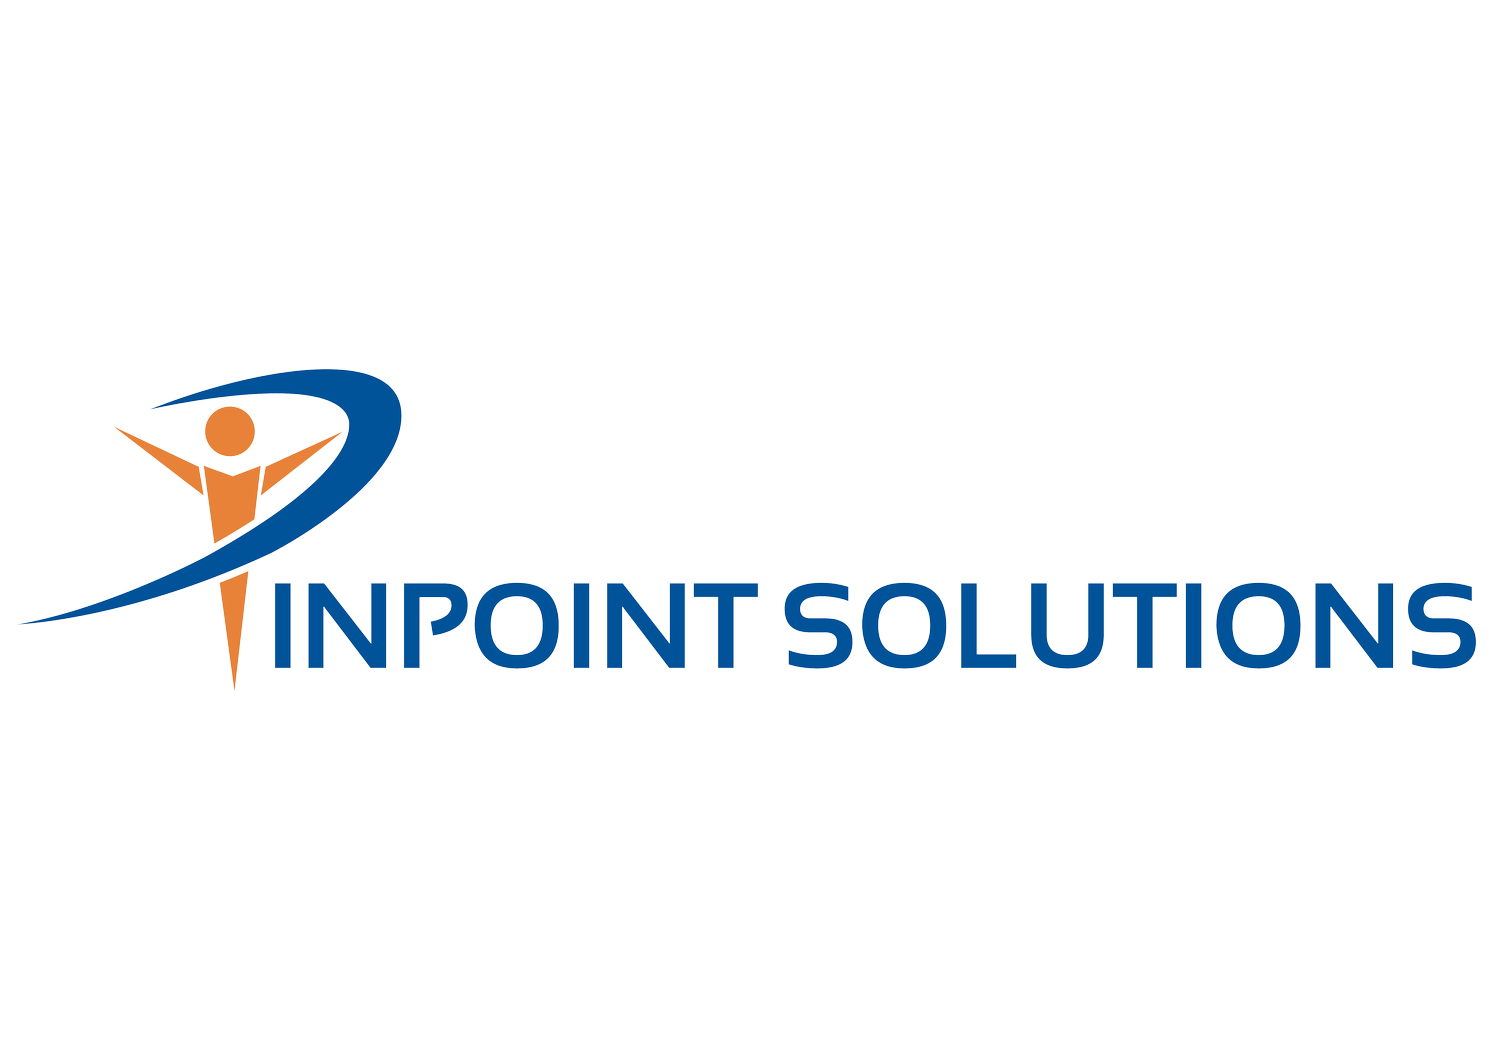 Pinpoint solutions